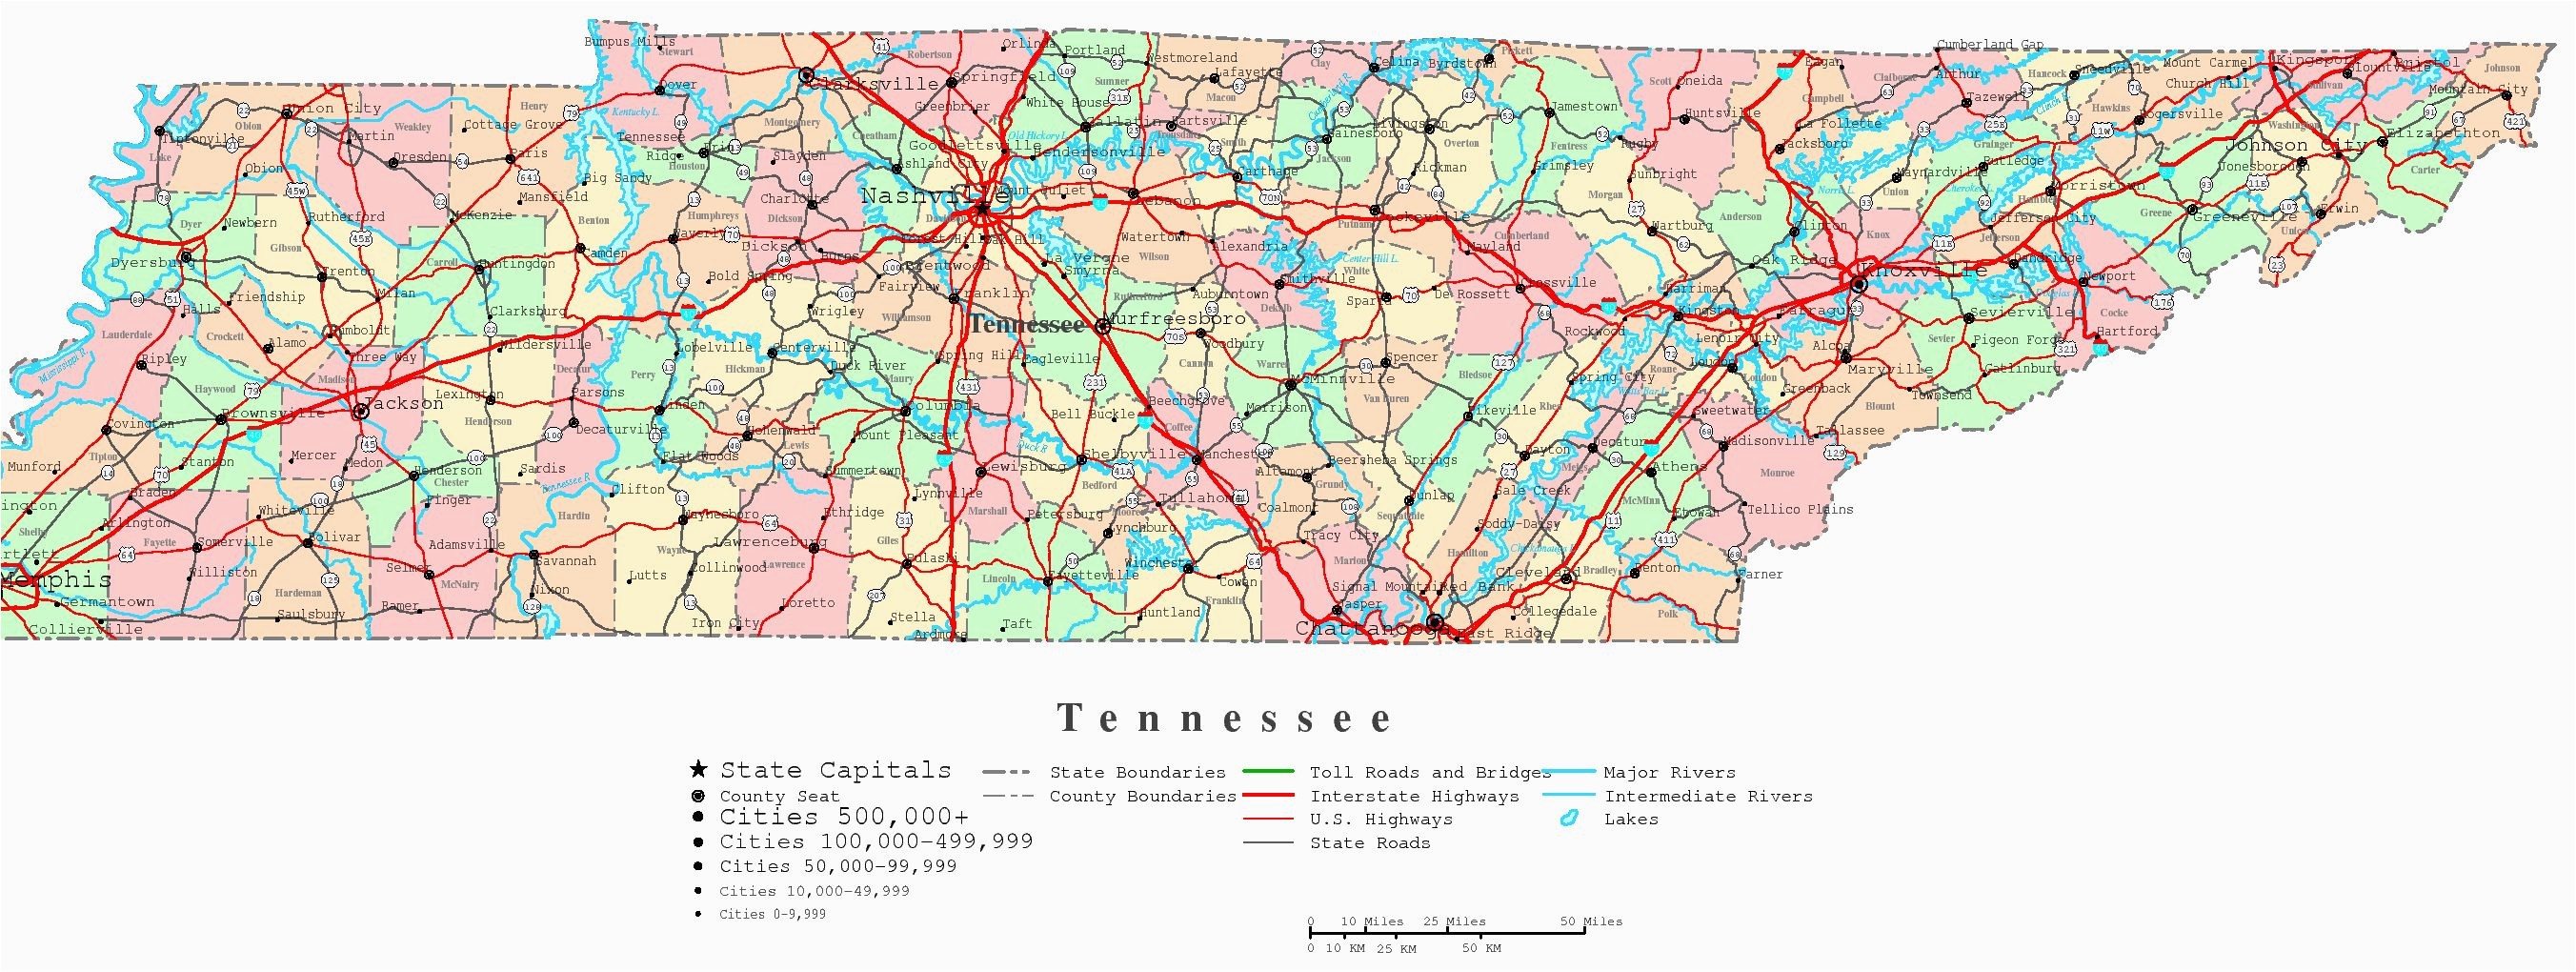 middle-tennessee-counties-map-secretmuseum